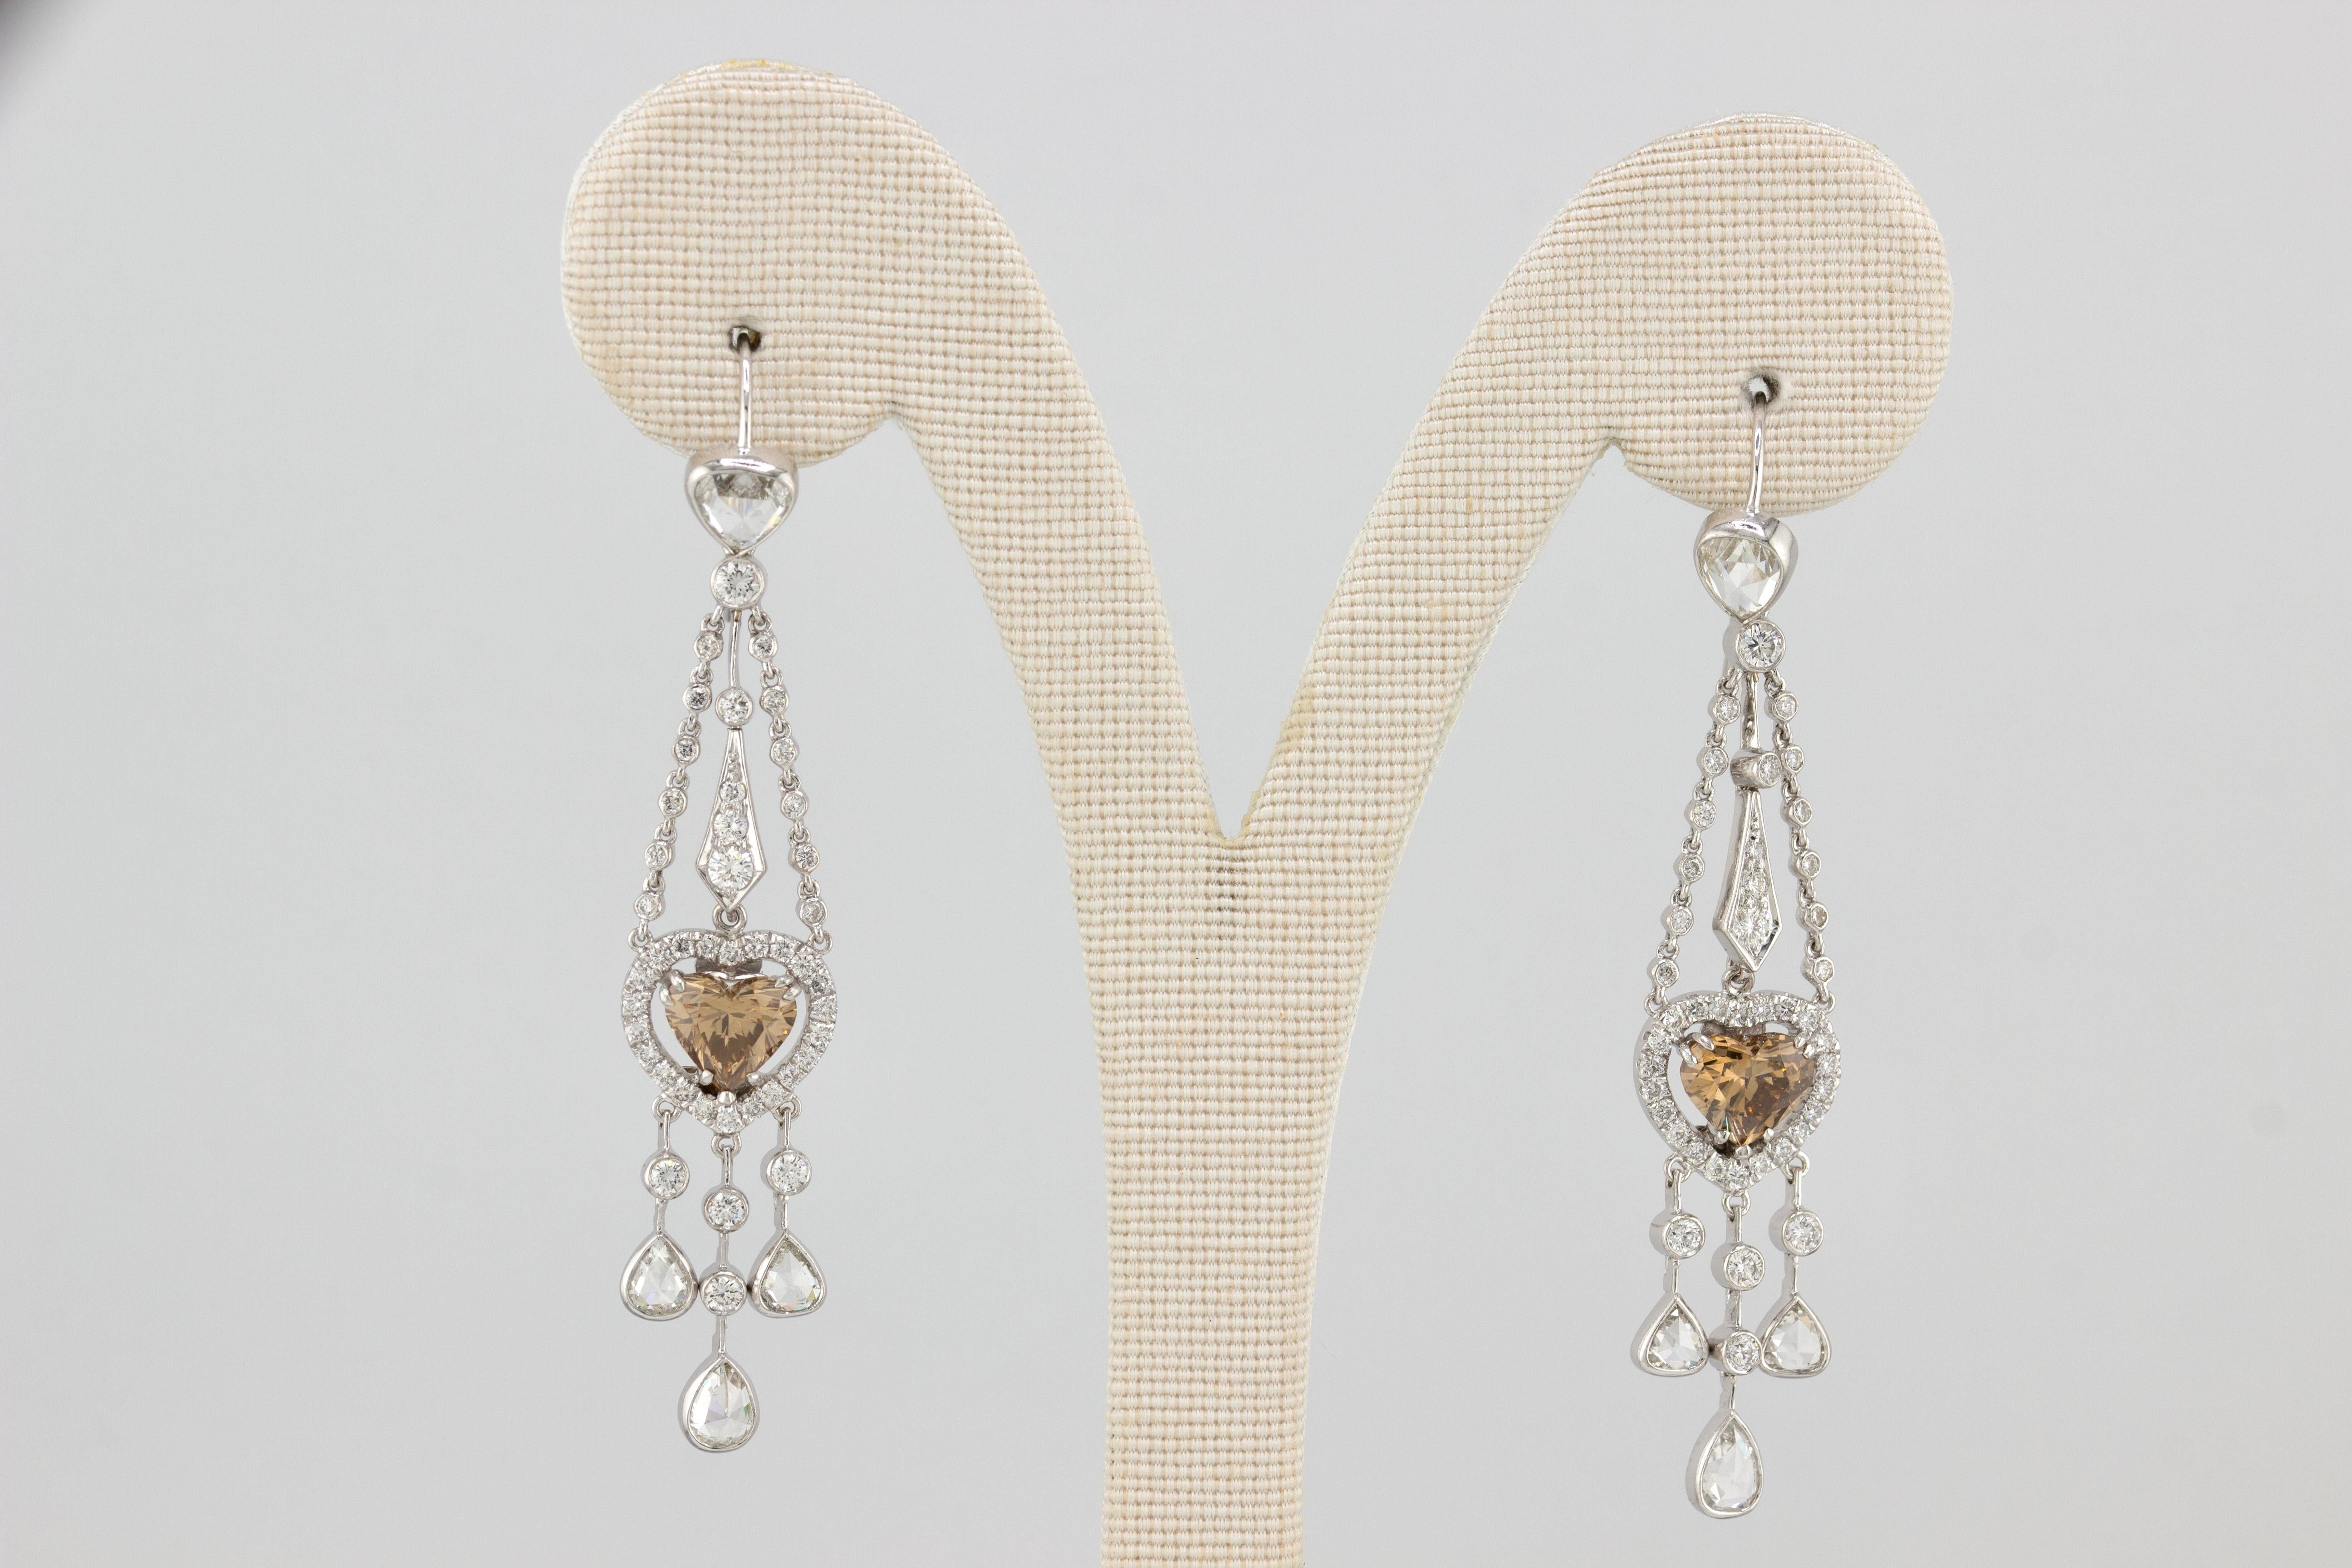 Fred Leighton Earrings
18K White Gold
2 Champagne Diamonds: 2.32cts
Diamonds on the side: approx 2.5ctw
SKU: ECJ01669
